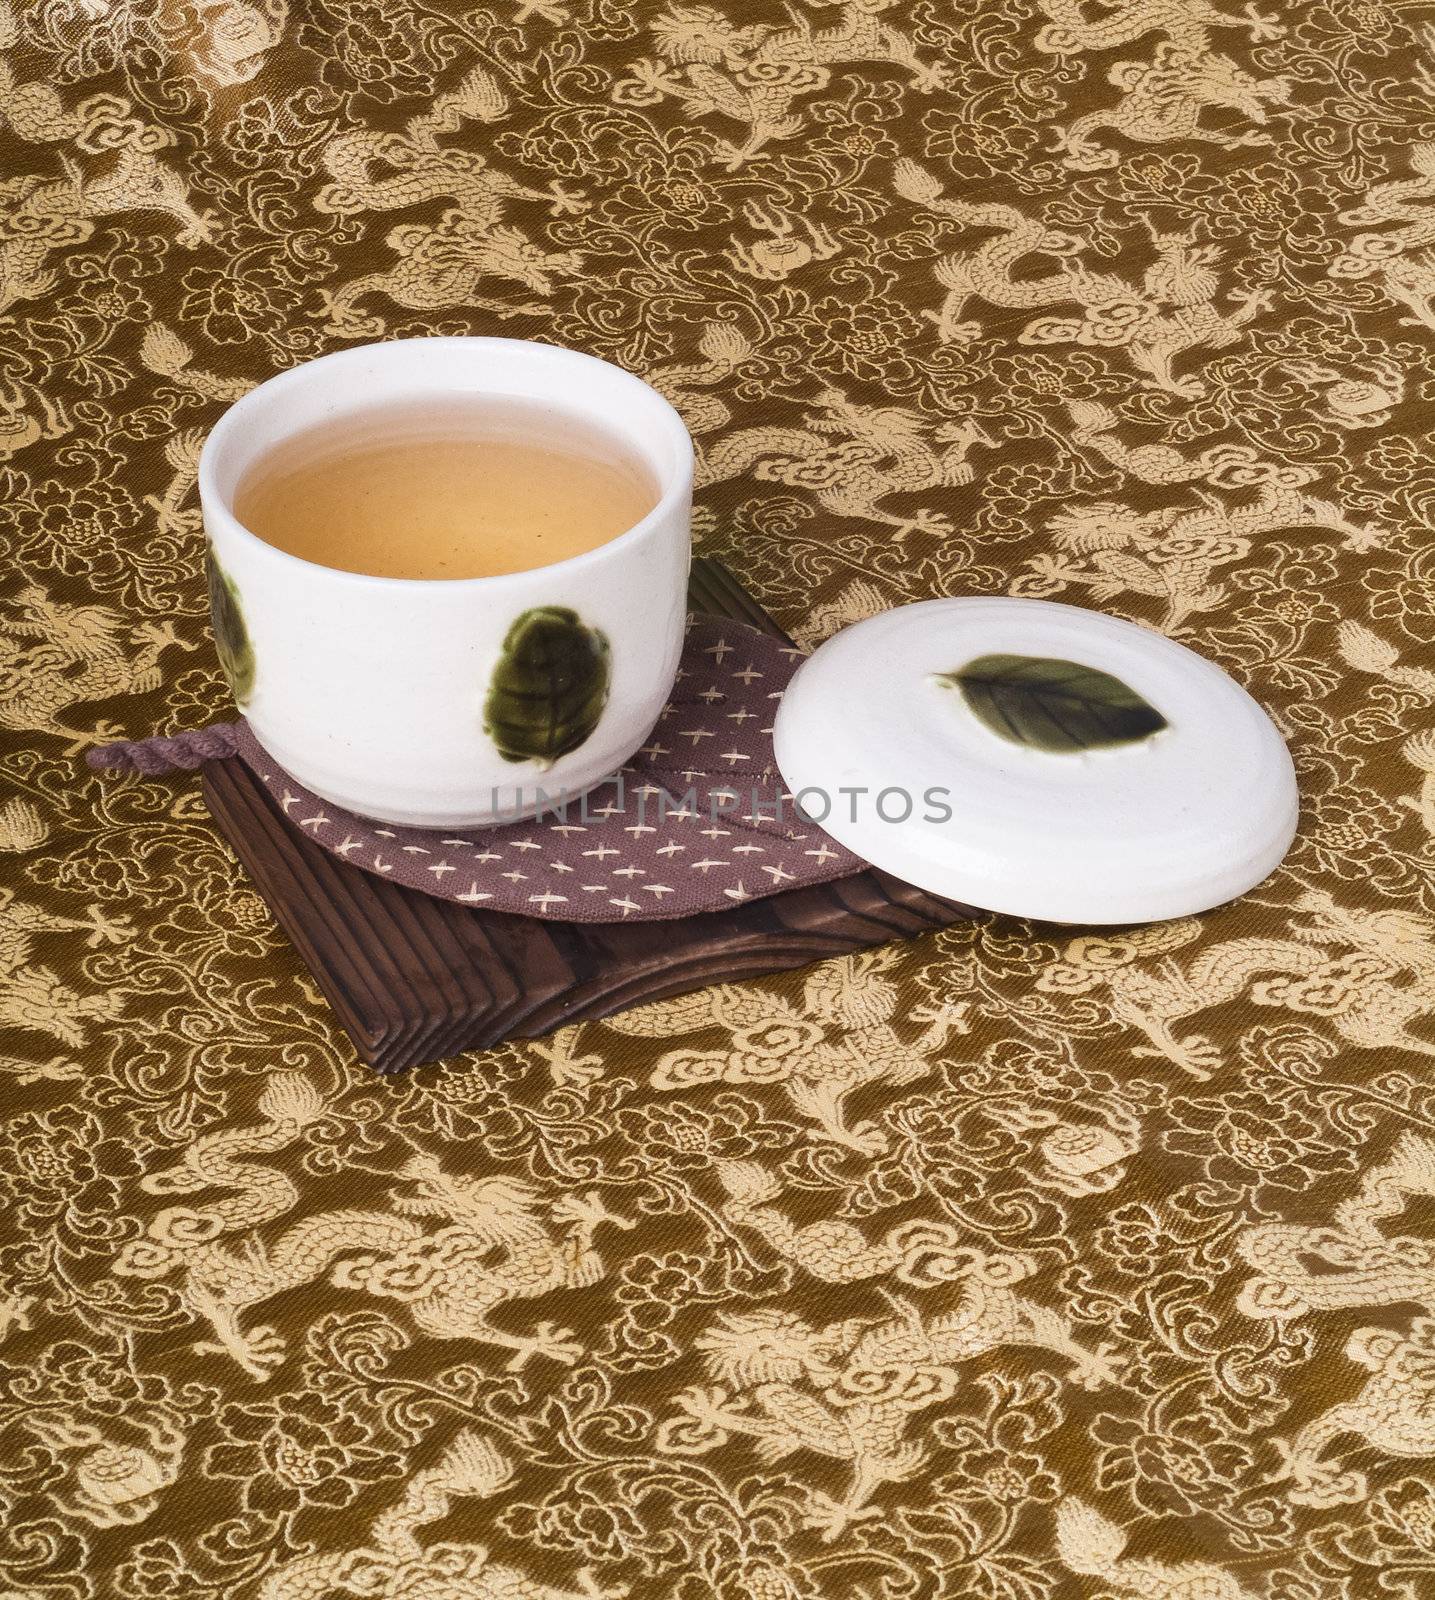 green tea set with background